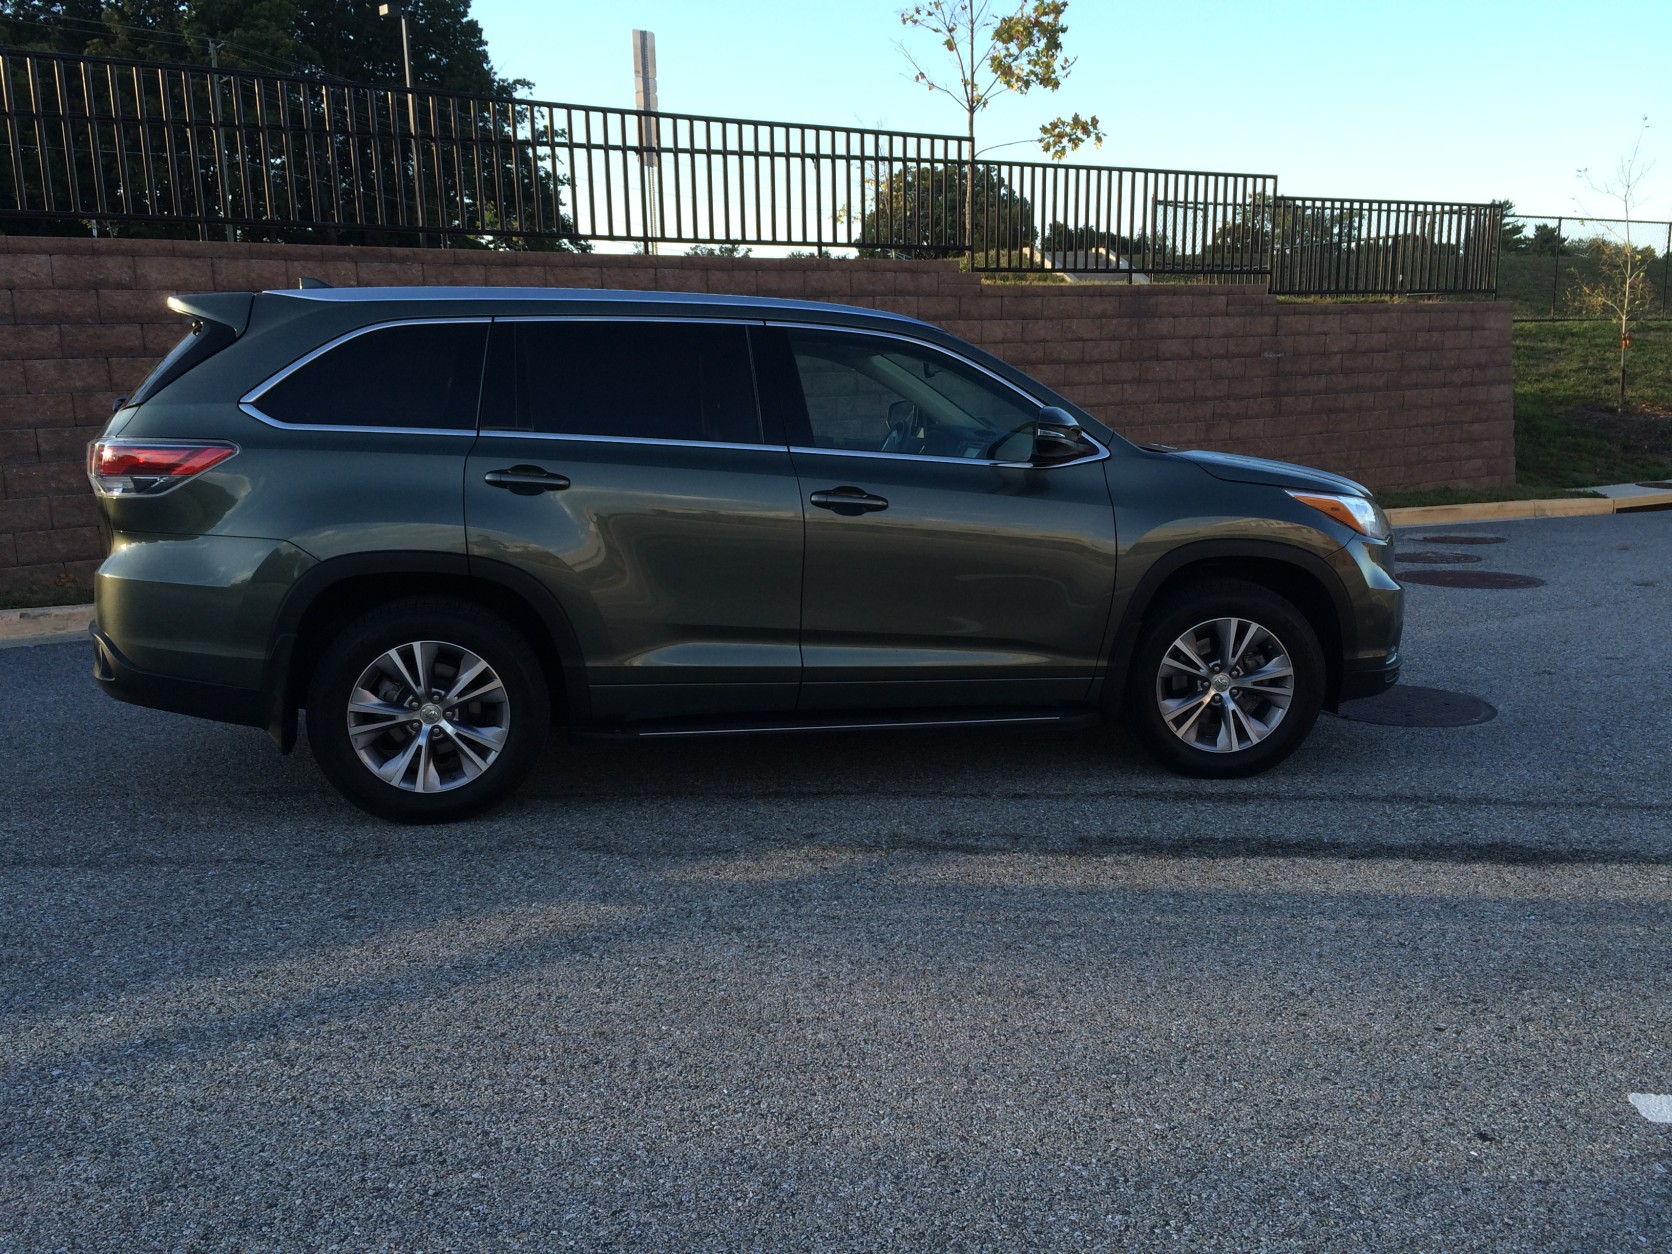 There is also a hybrid version of the Toyota Highlander if you want better fuel economy. (WTOP/Mike Parris)